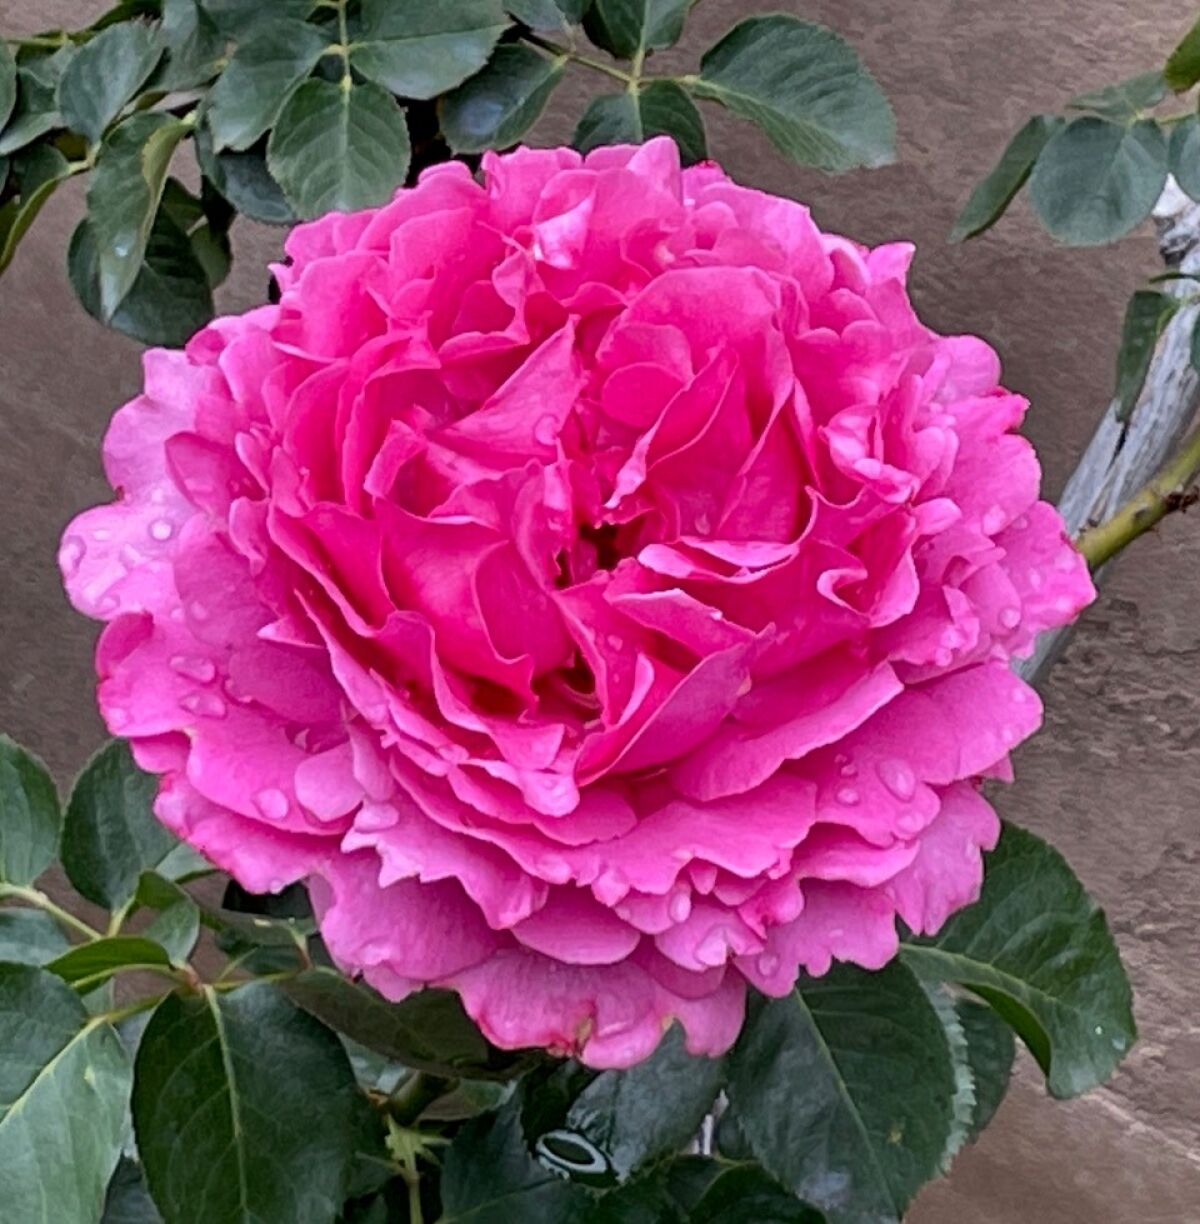 The deep pink ‘Yves Piaget’ rose has a very full bloom, with more than 41 and as many as 100 petals.